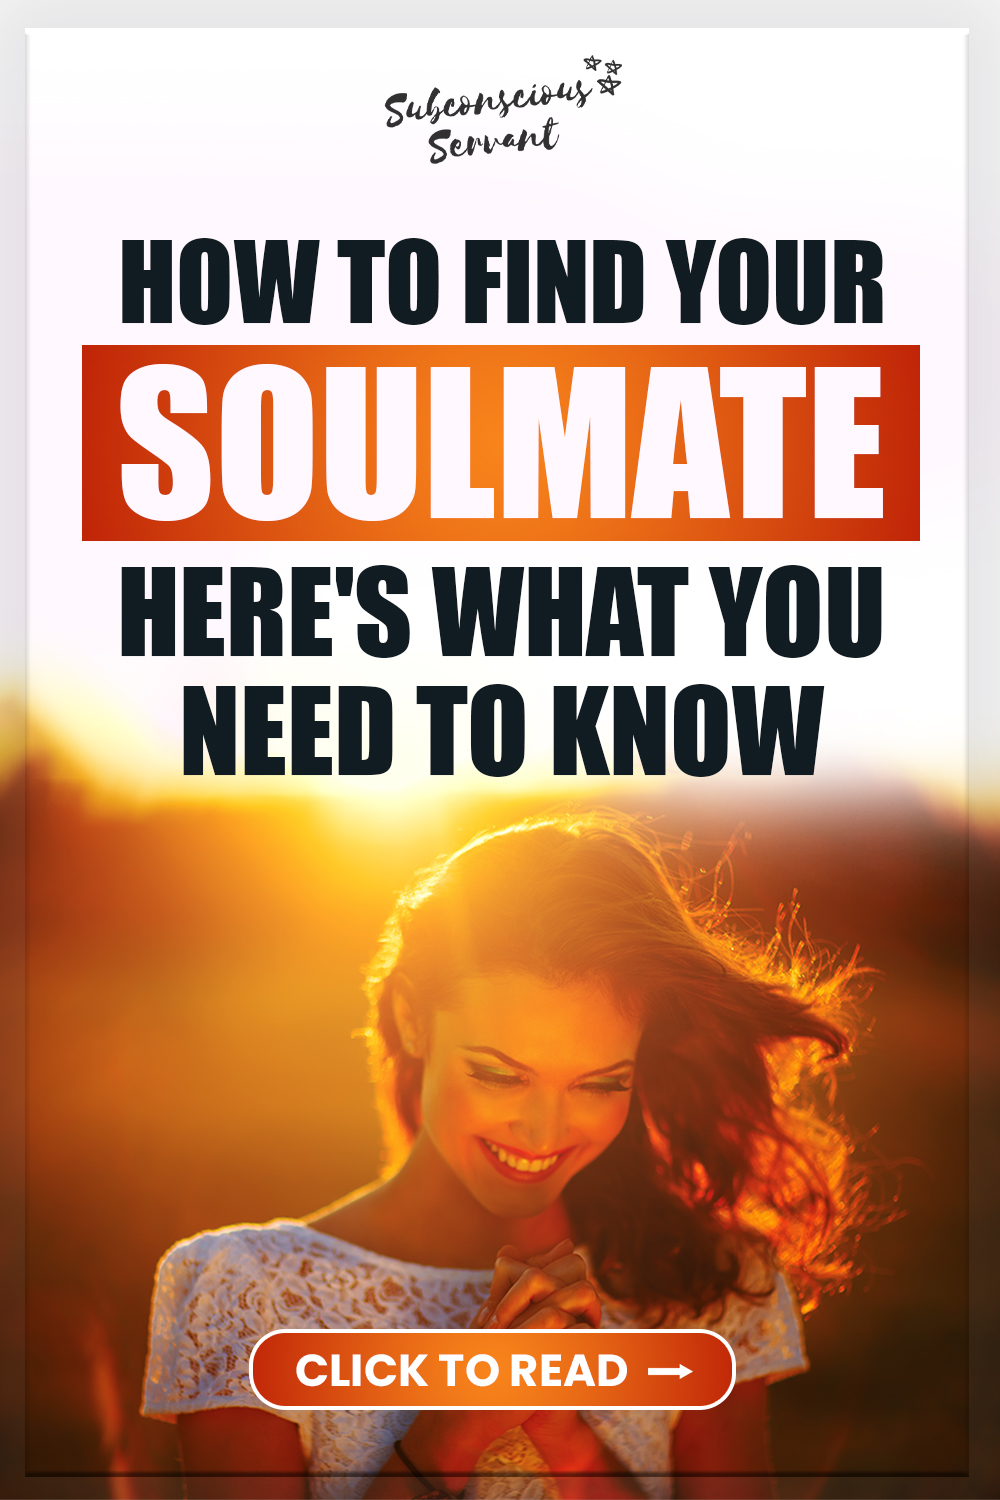 How To Find Your Soulmate (Here's What You NEED To Know)